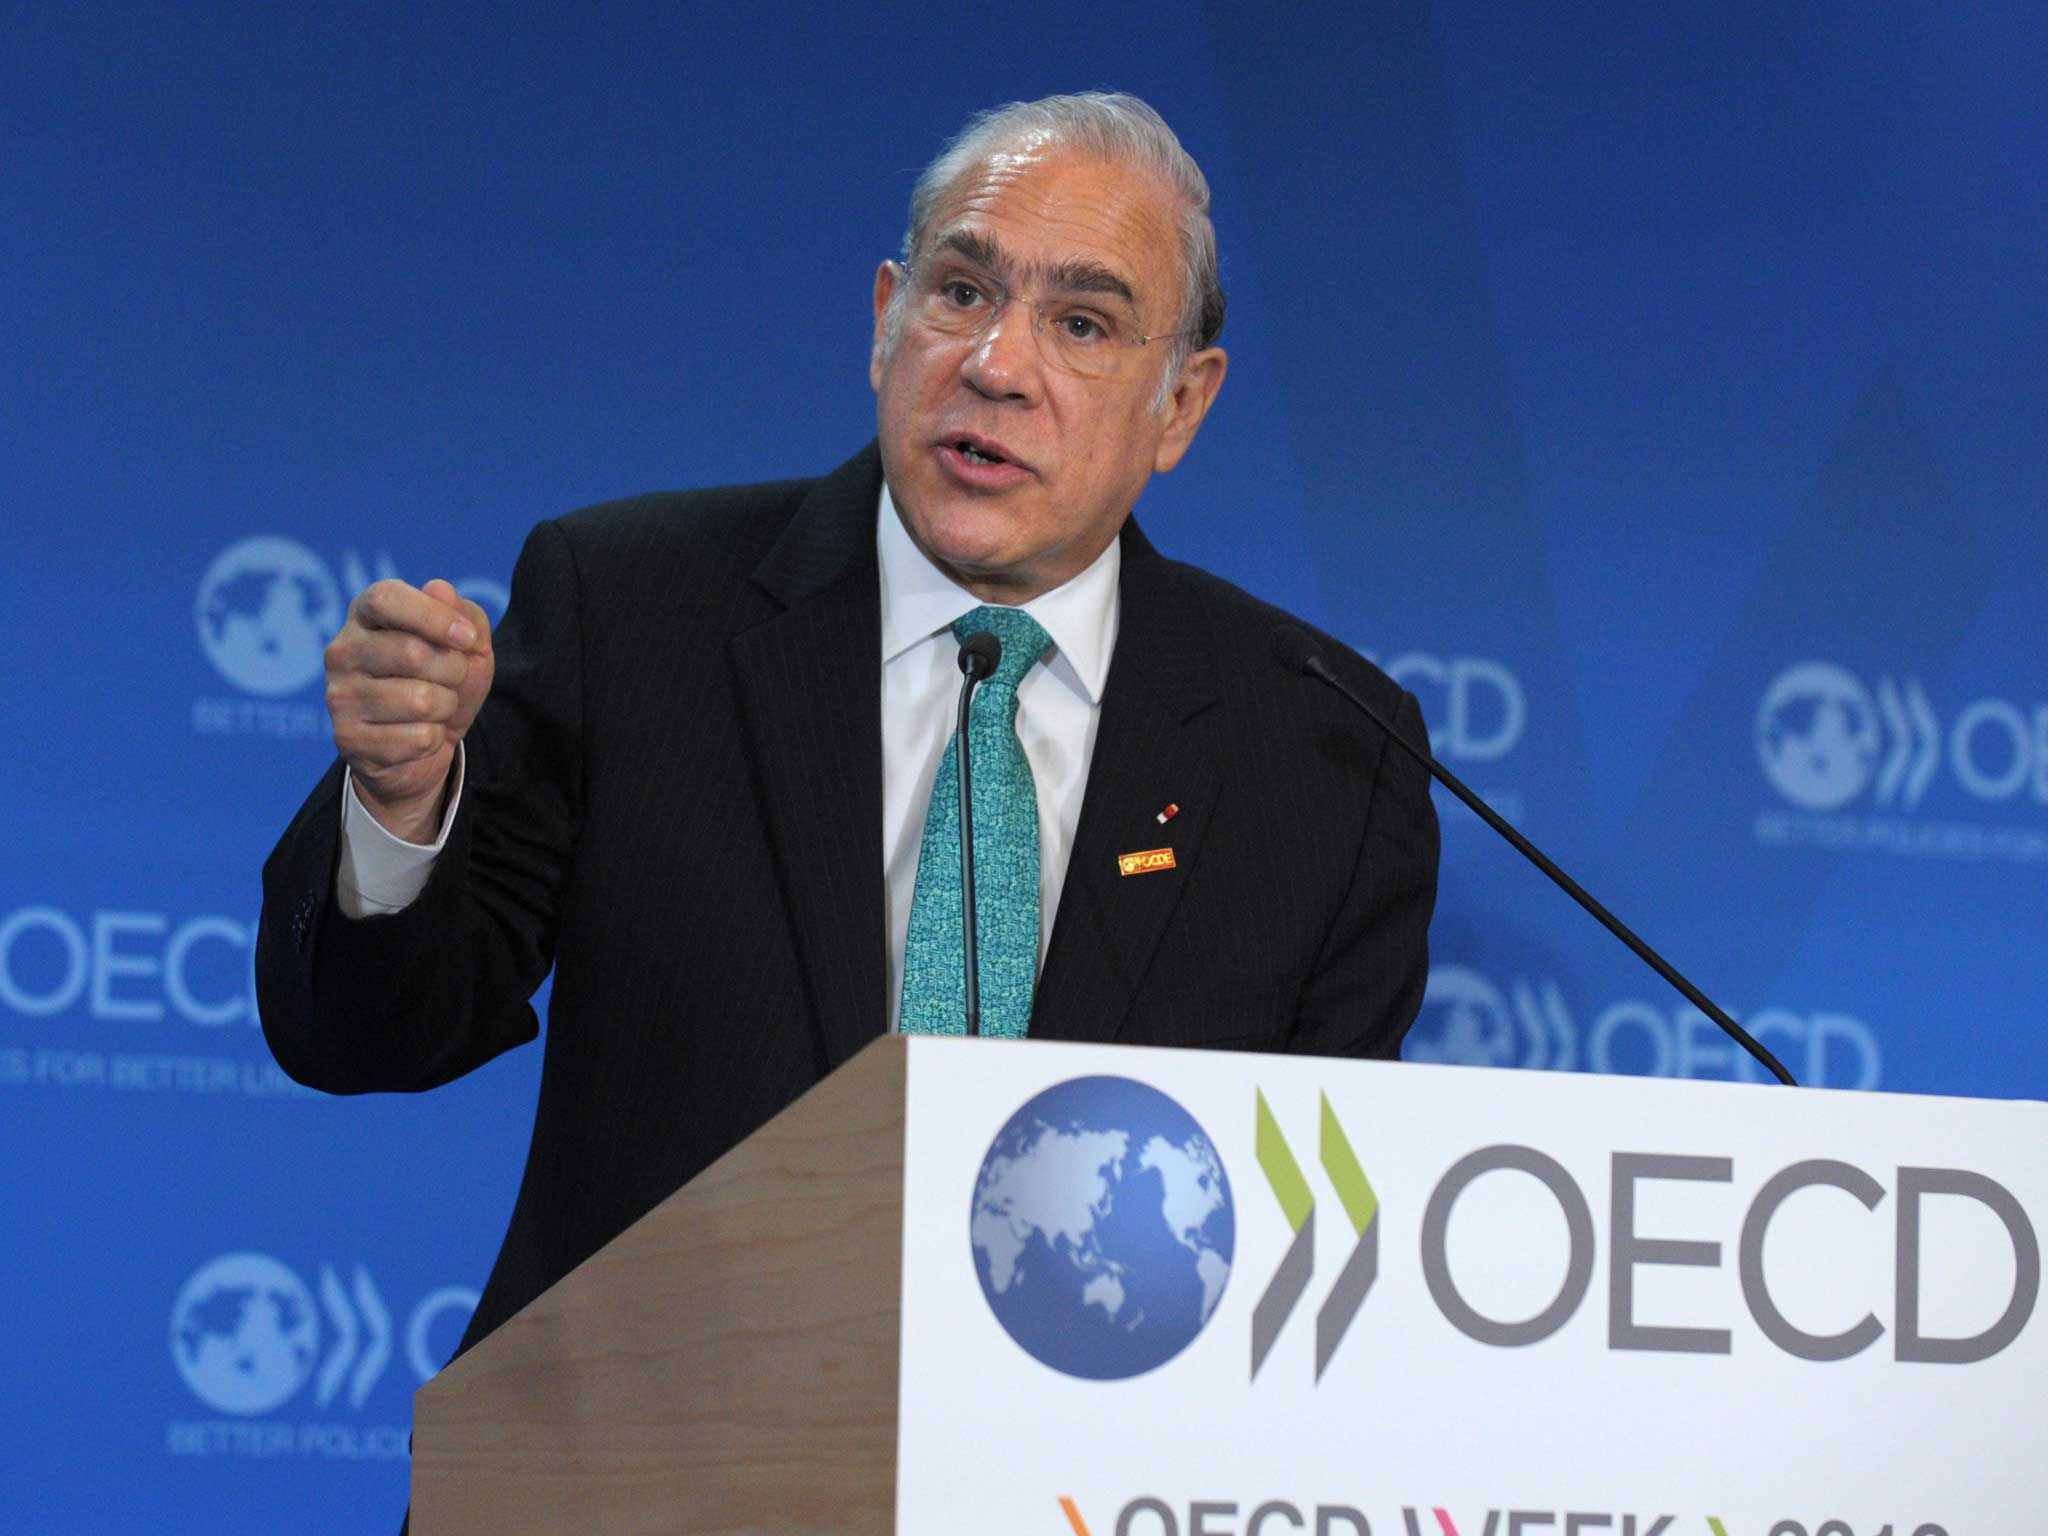 The OECD’s Secretary-General Angel Gurria has warned of a “low-growth” trap for the world